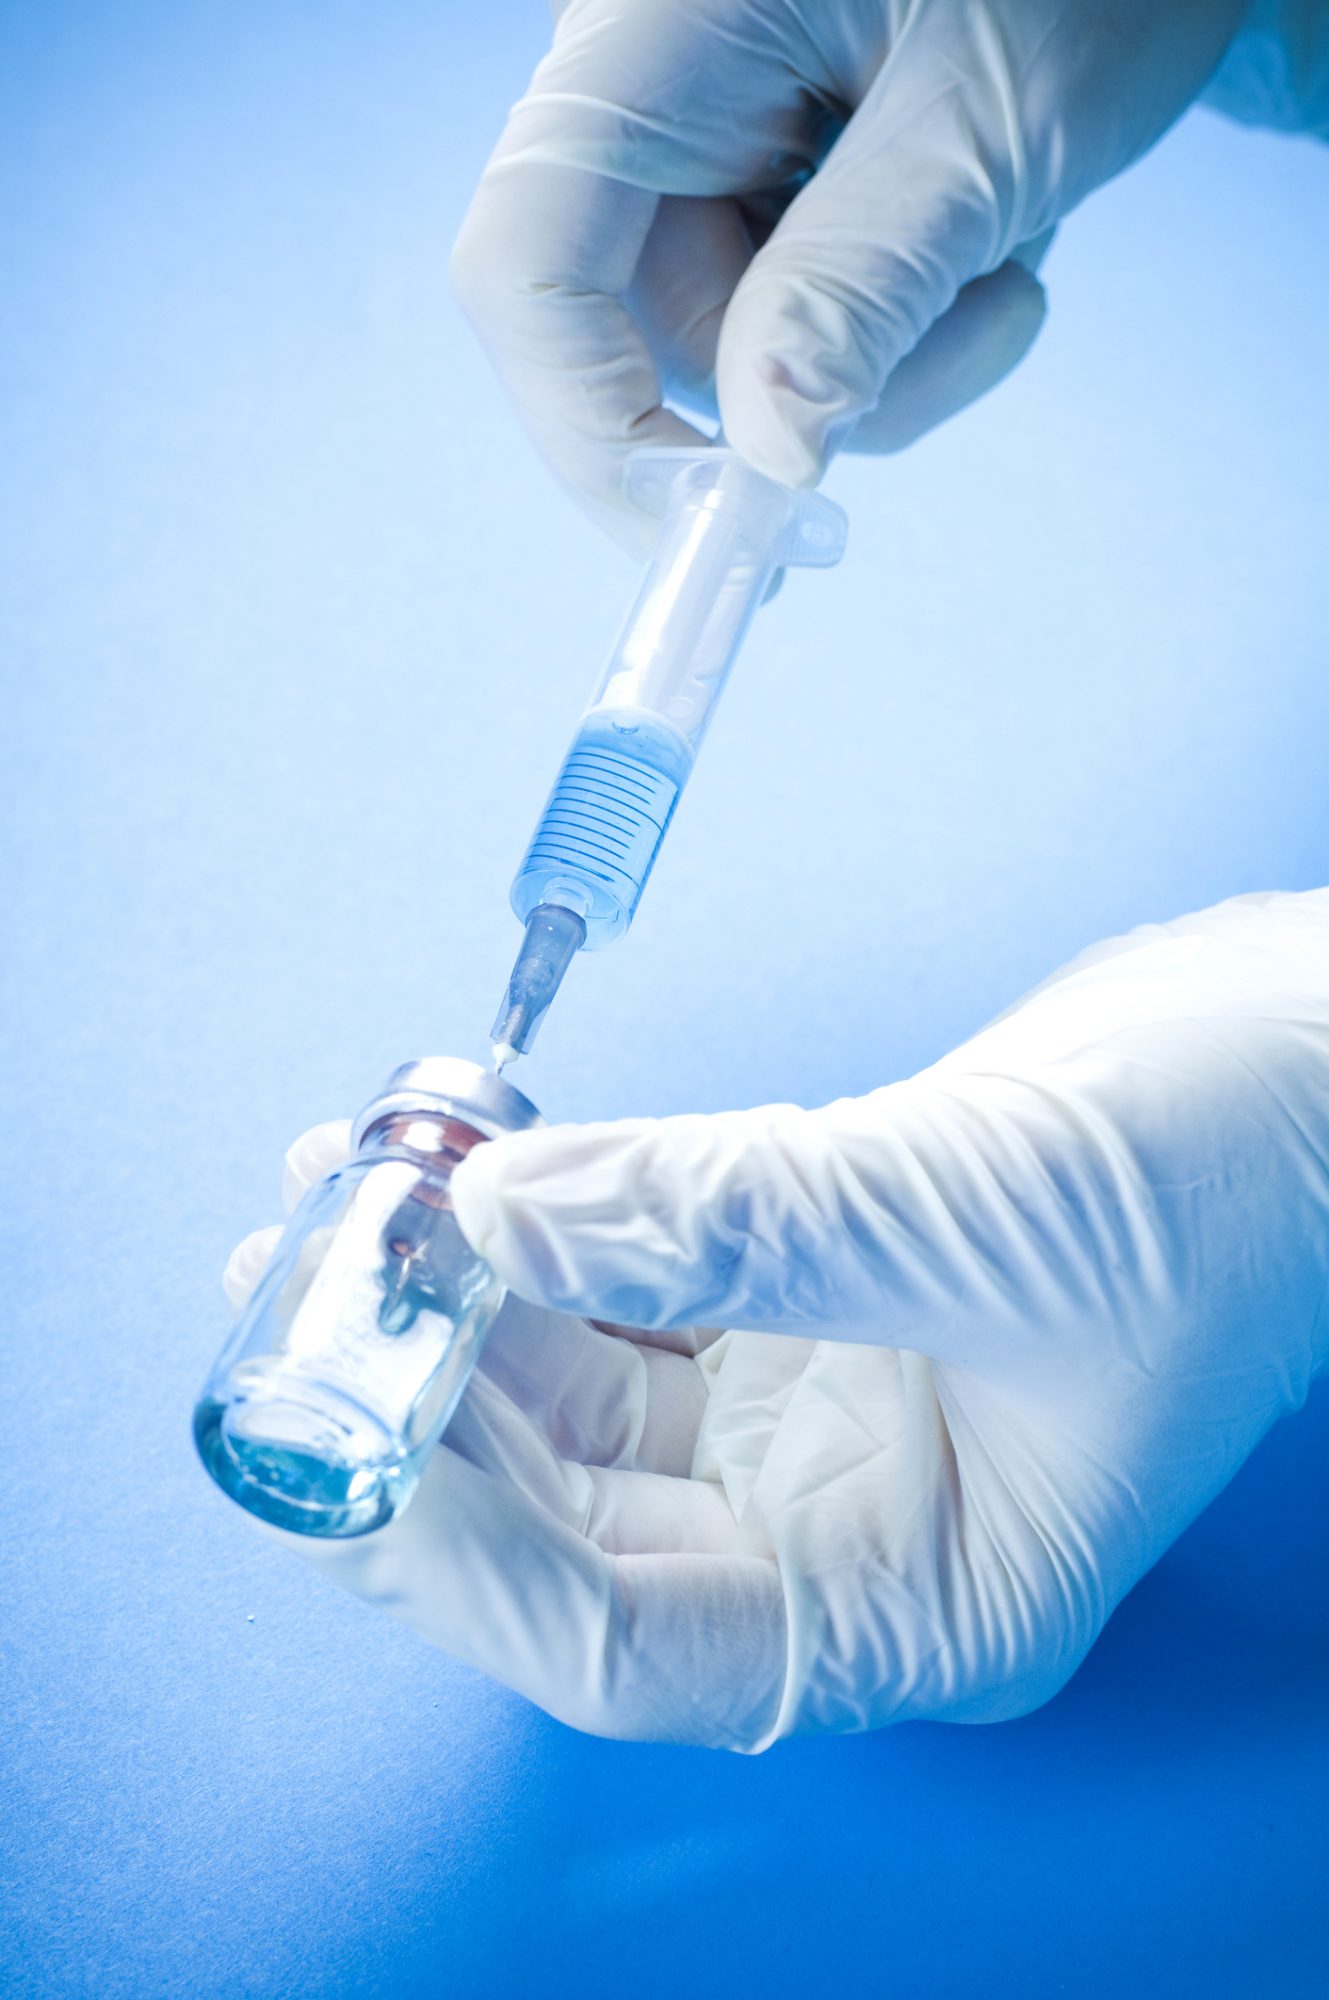 A doctor extract a vaccine dose using a syringe